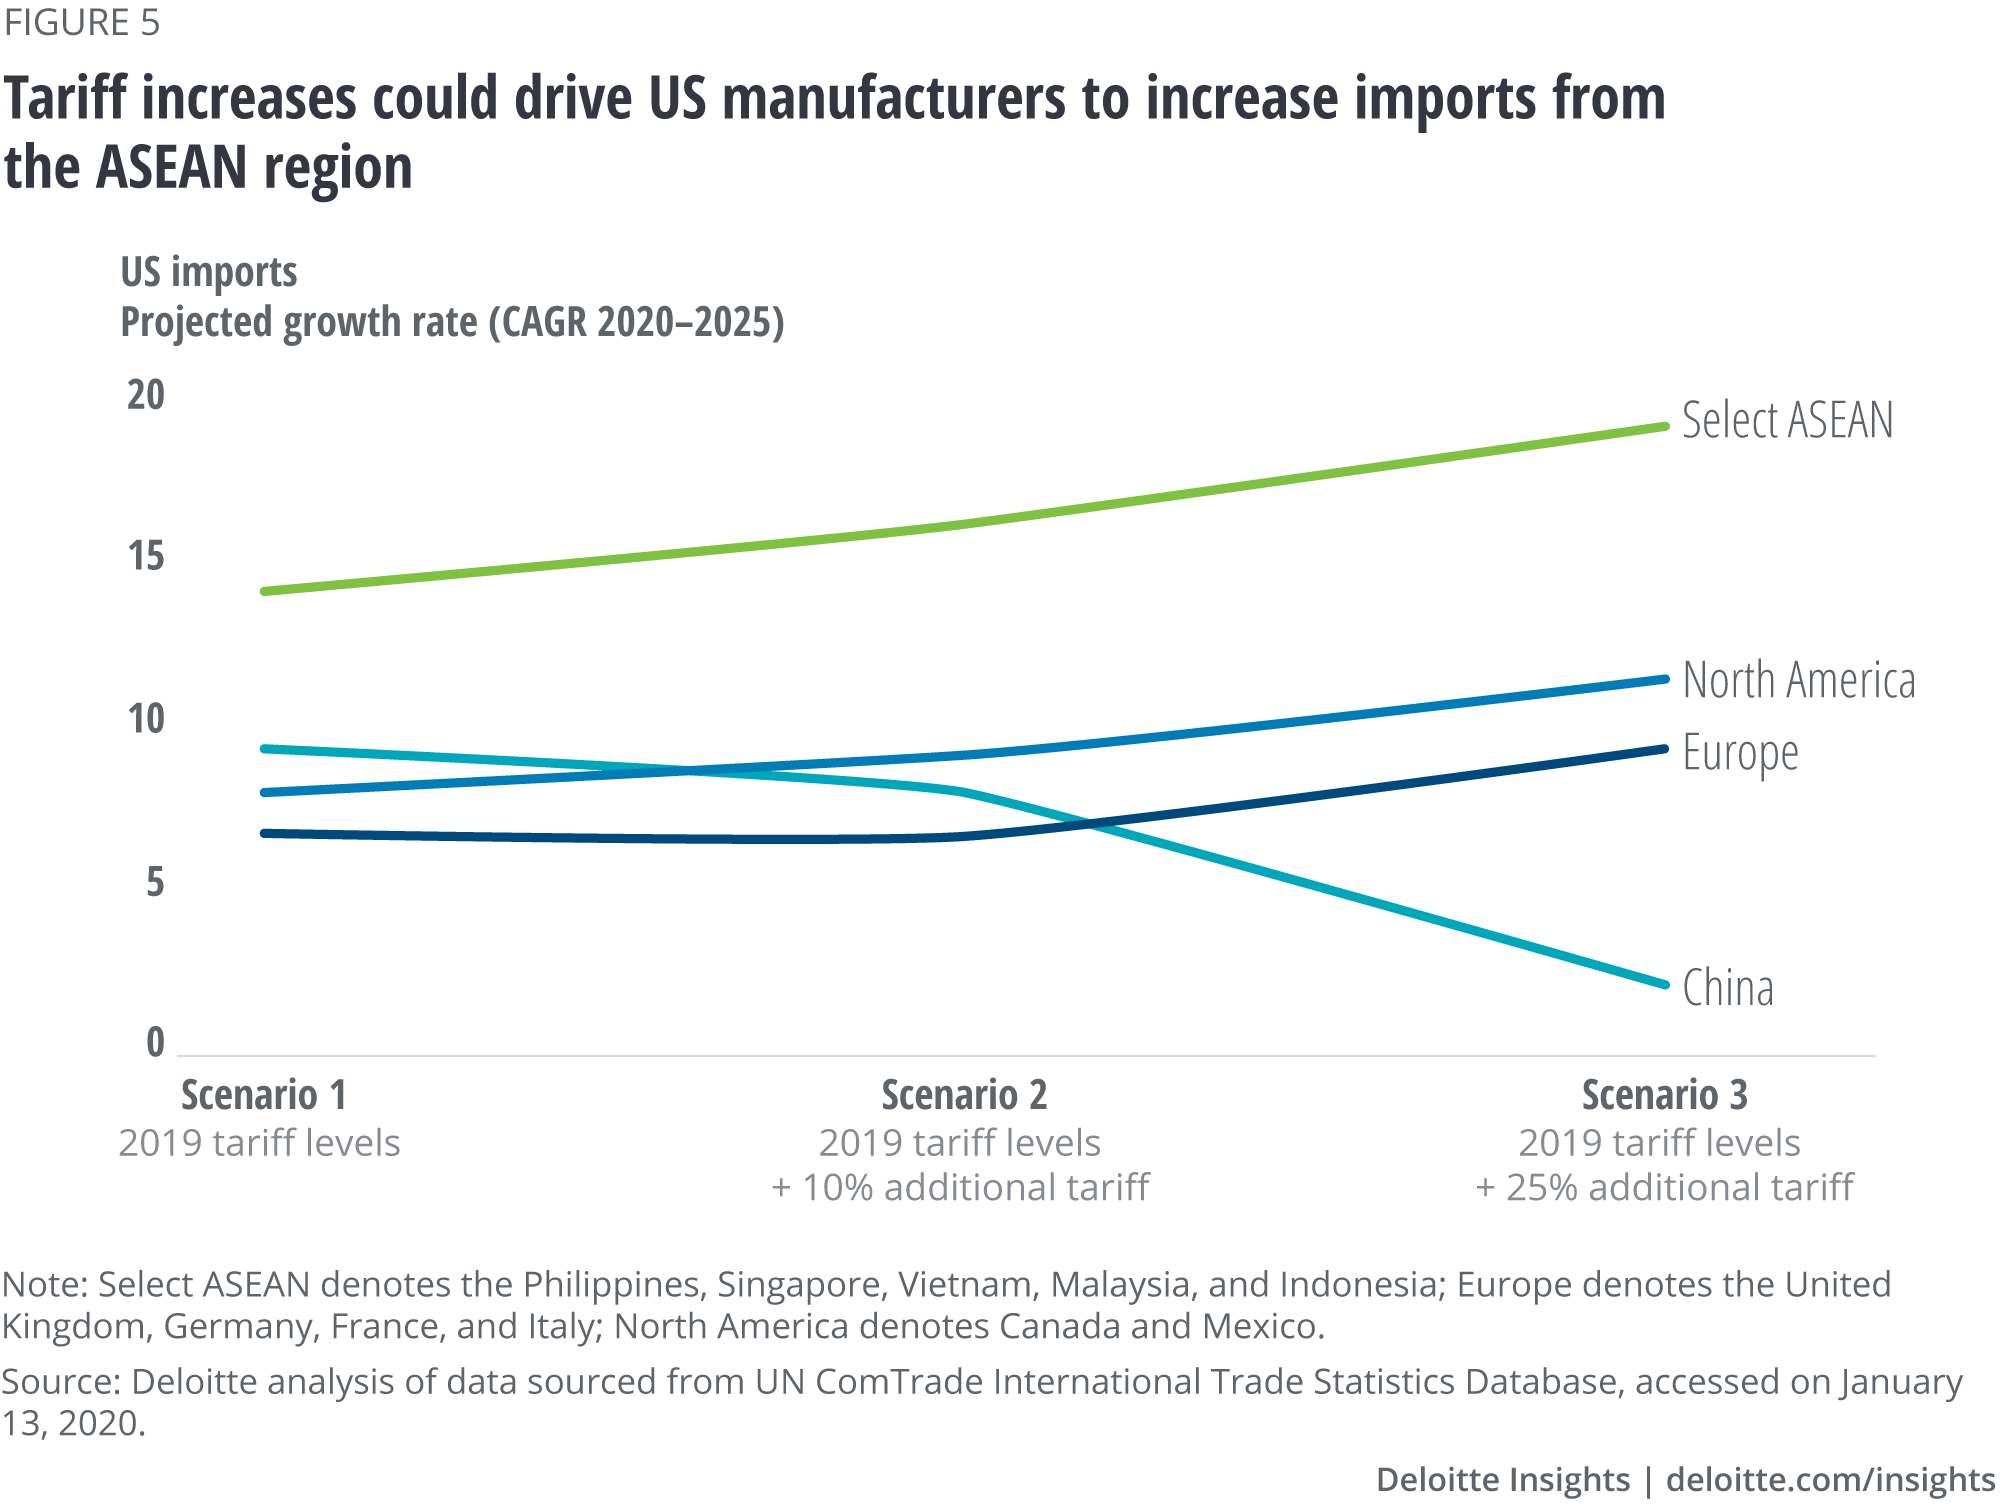 Tariff increases could drive US manufacturers to increase imports from the ASEAN region